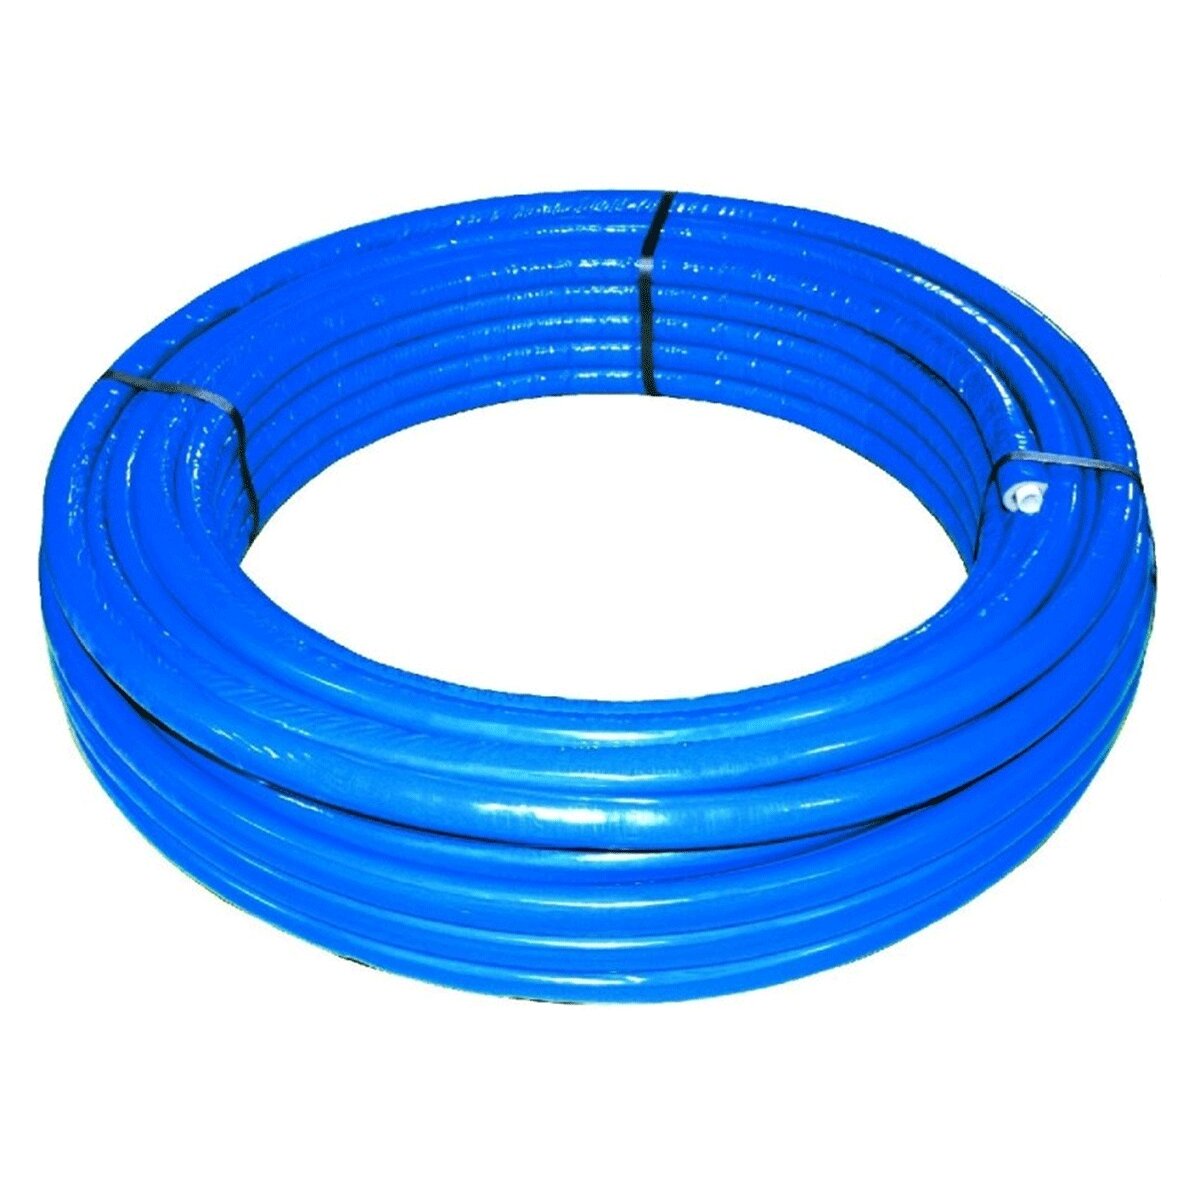 Valsir Mixal multilayer pipe Ø26X3 mm with 10 mm insulating sheath Blue